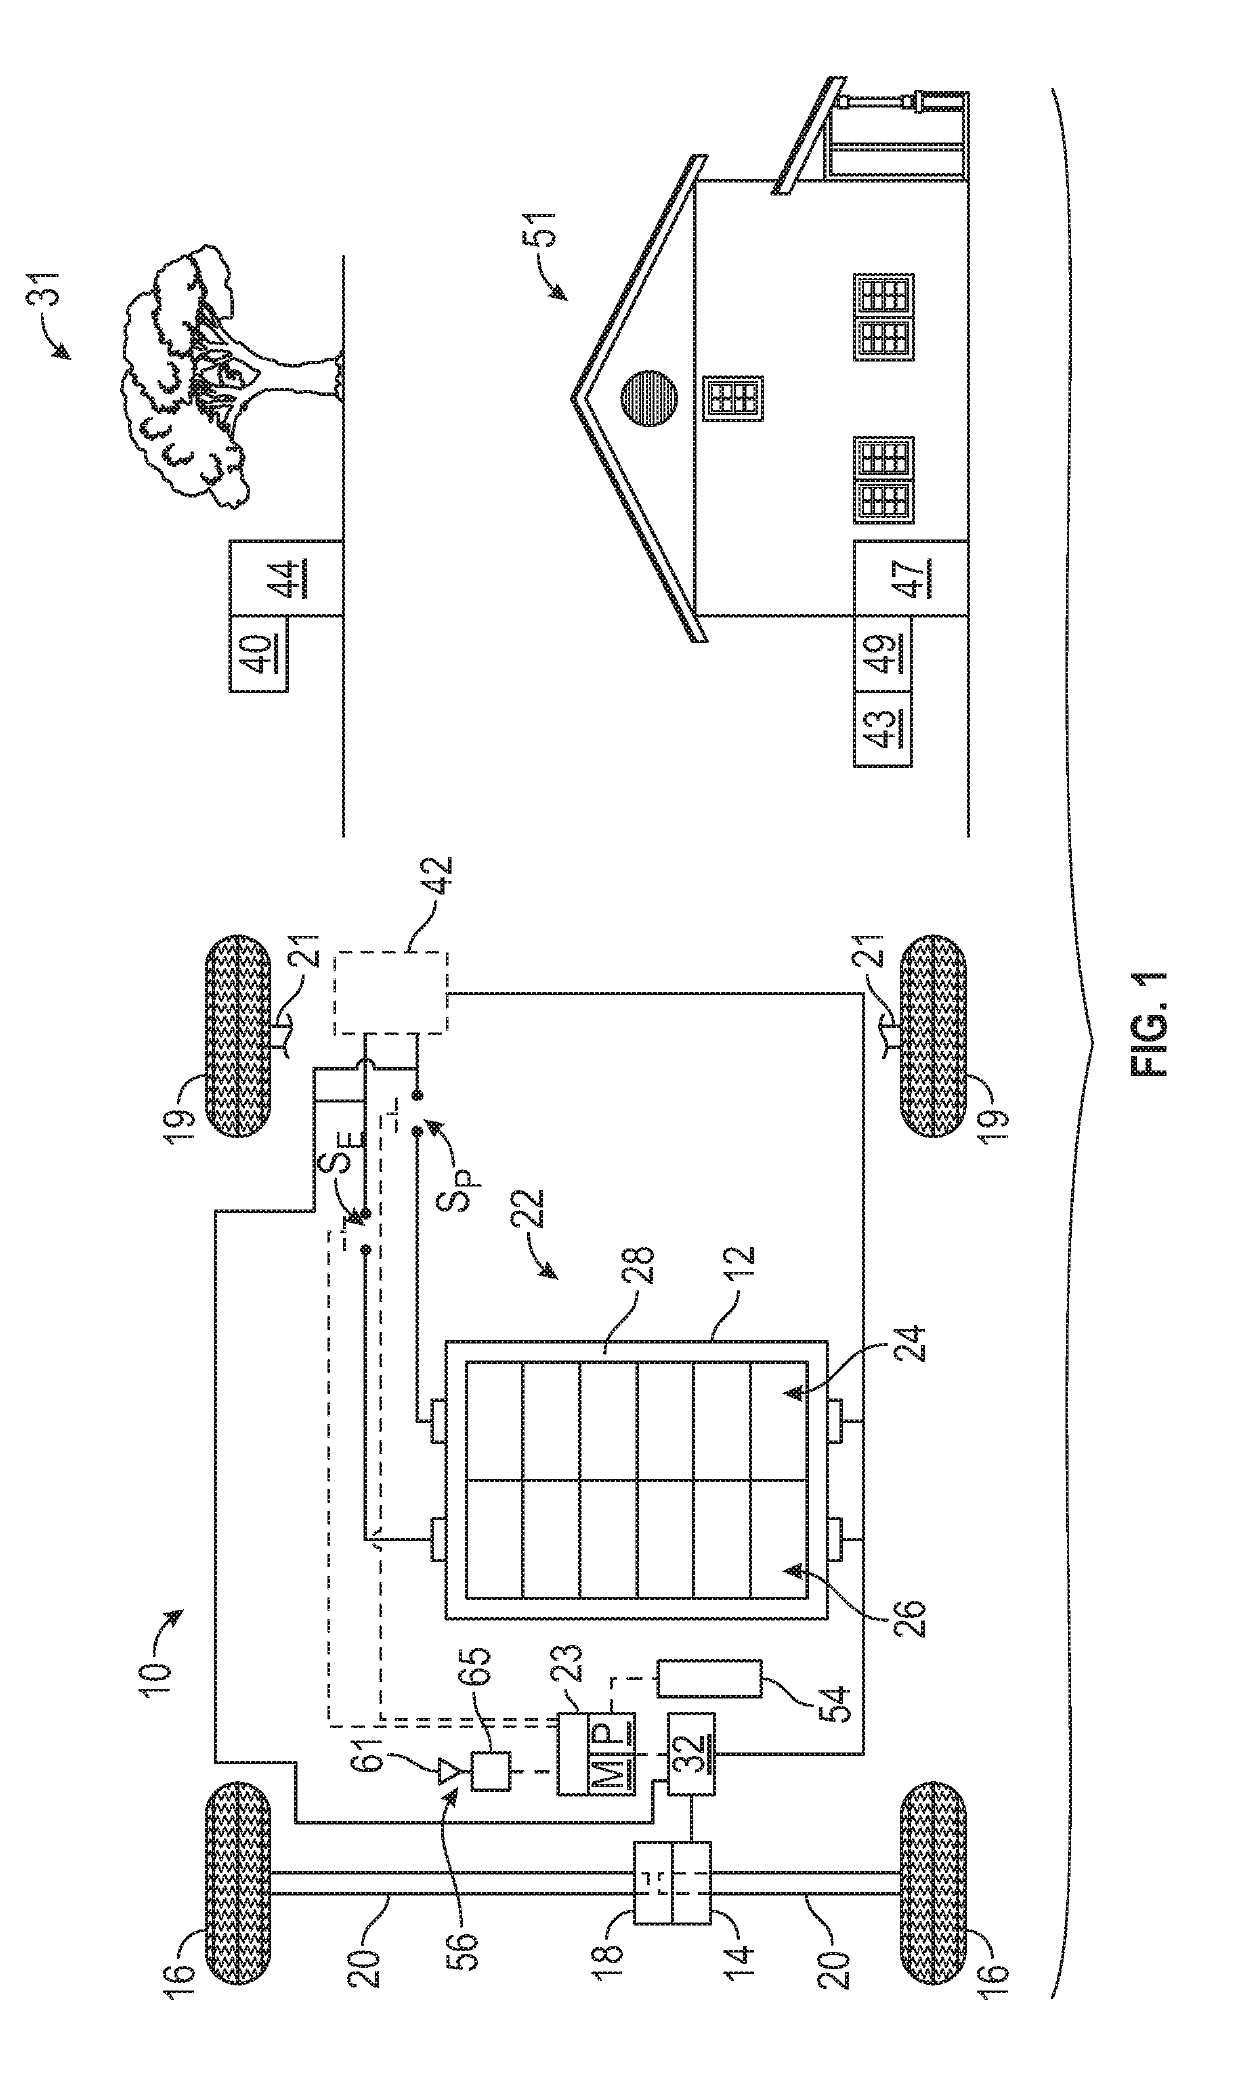 Vehicle with hybrid battery pack and human-machine interface and method of monitoring